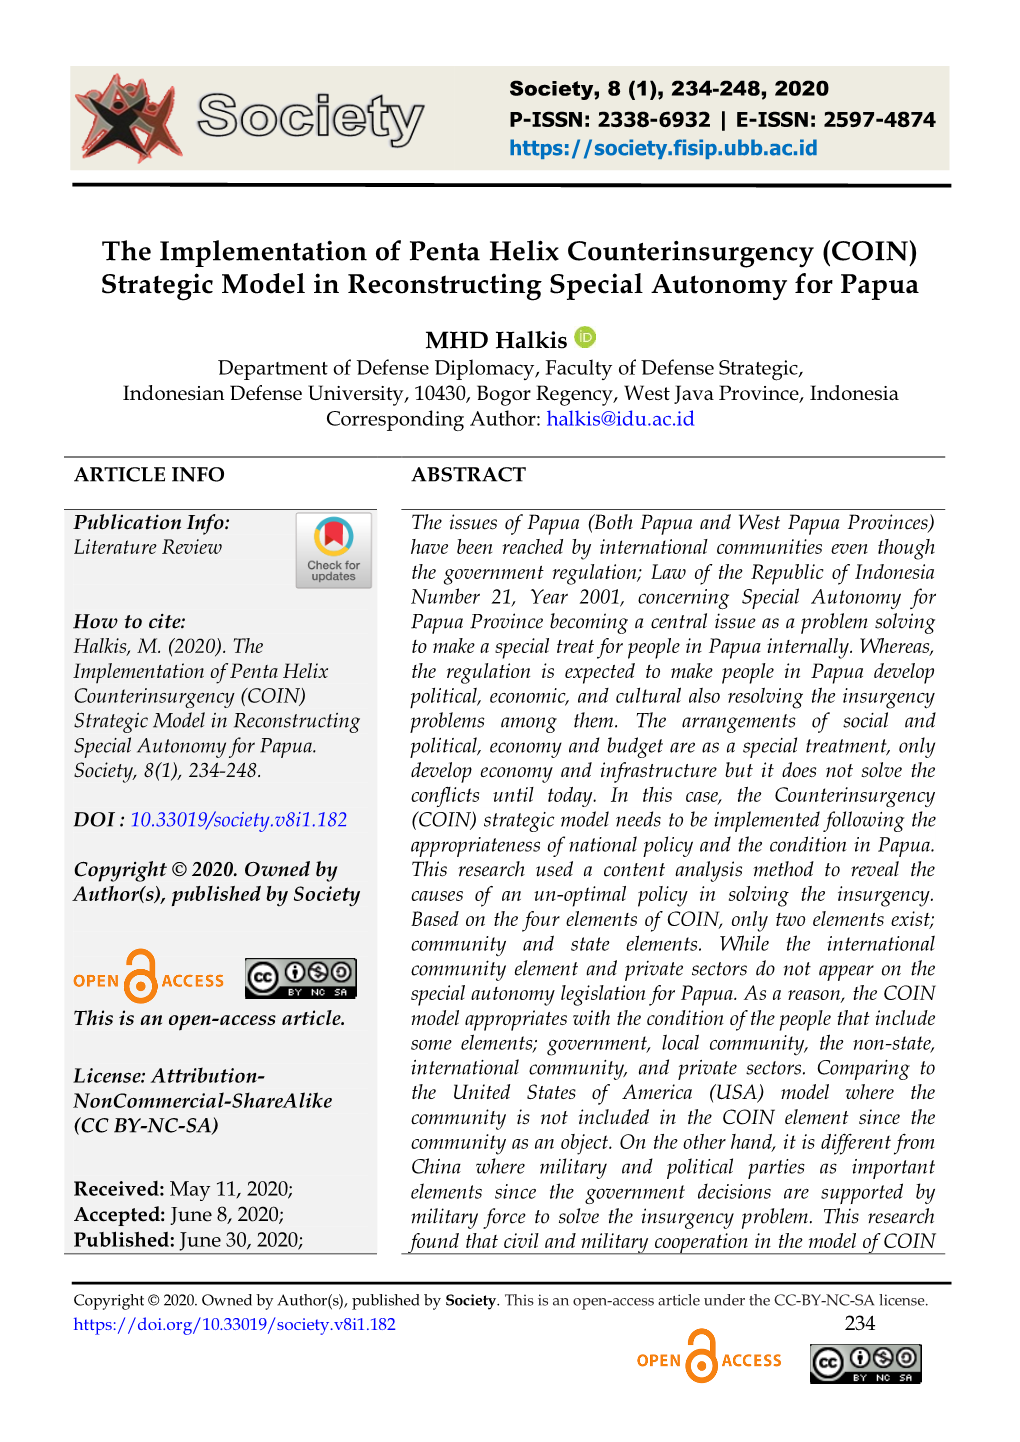 The Implementation of Penta Helix Counterinsurgency (COIN) Strategic Model in Reconstructing Special Autonomy for Papua